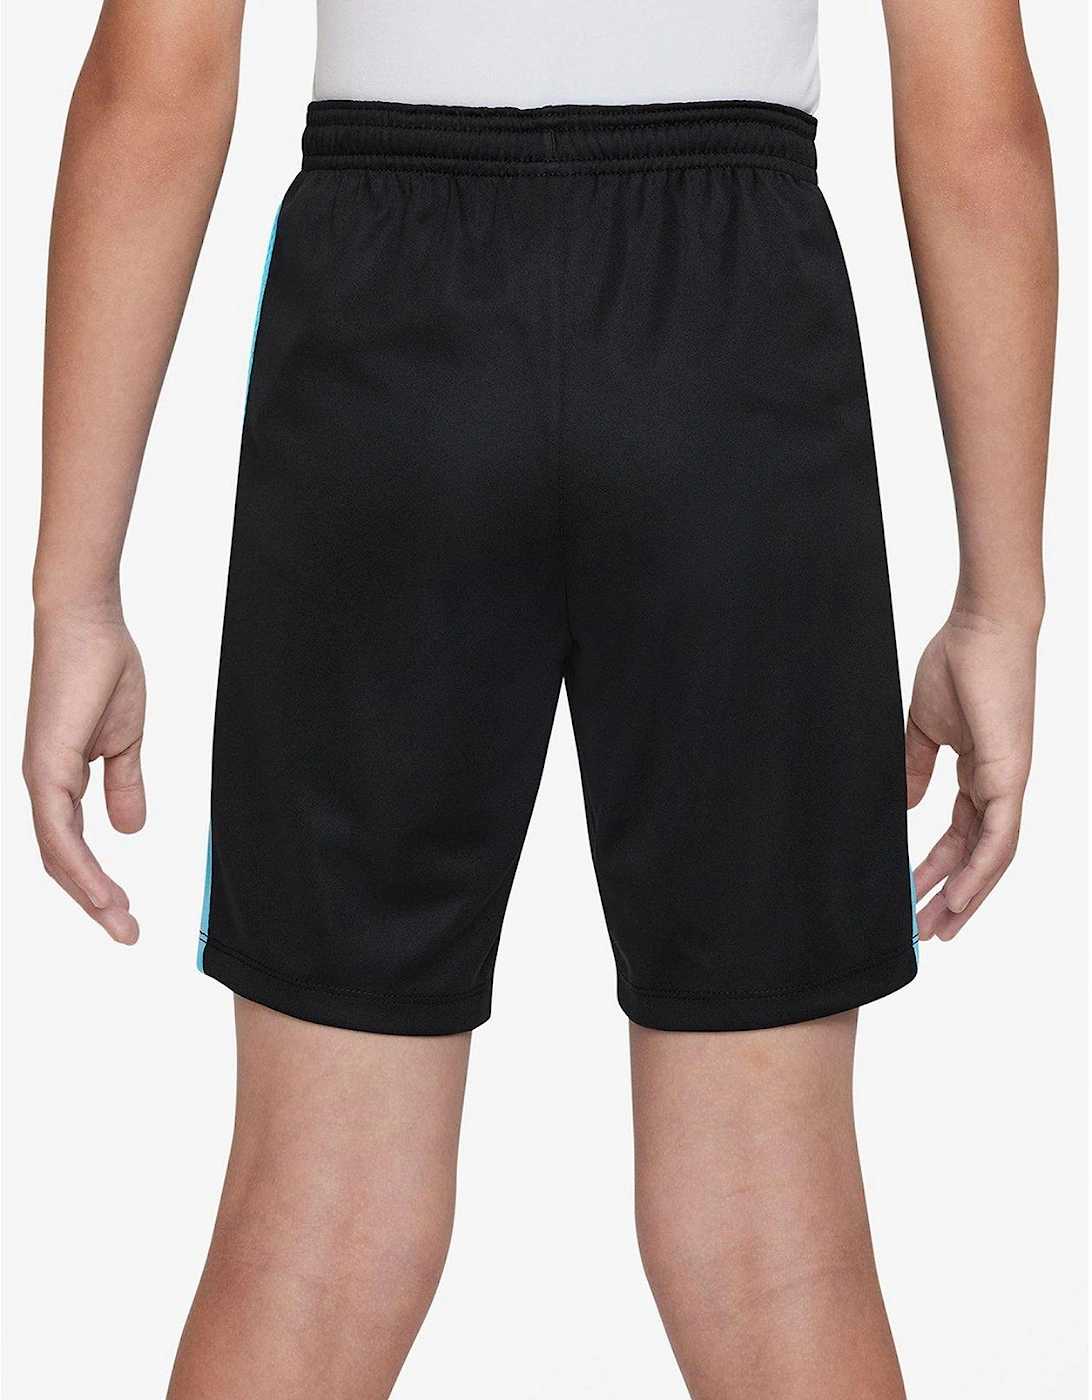 Youth KM Player Shorts - Blue